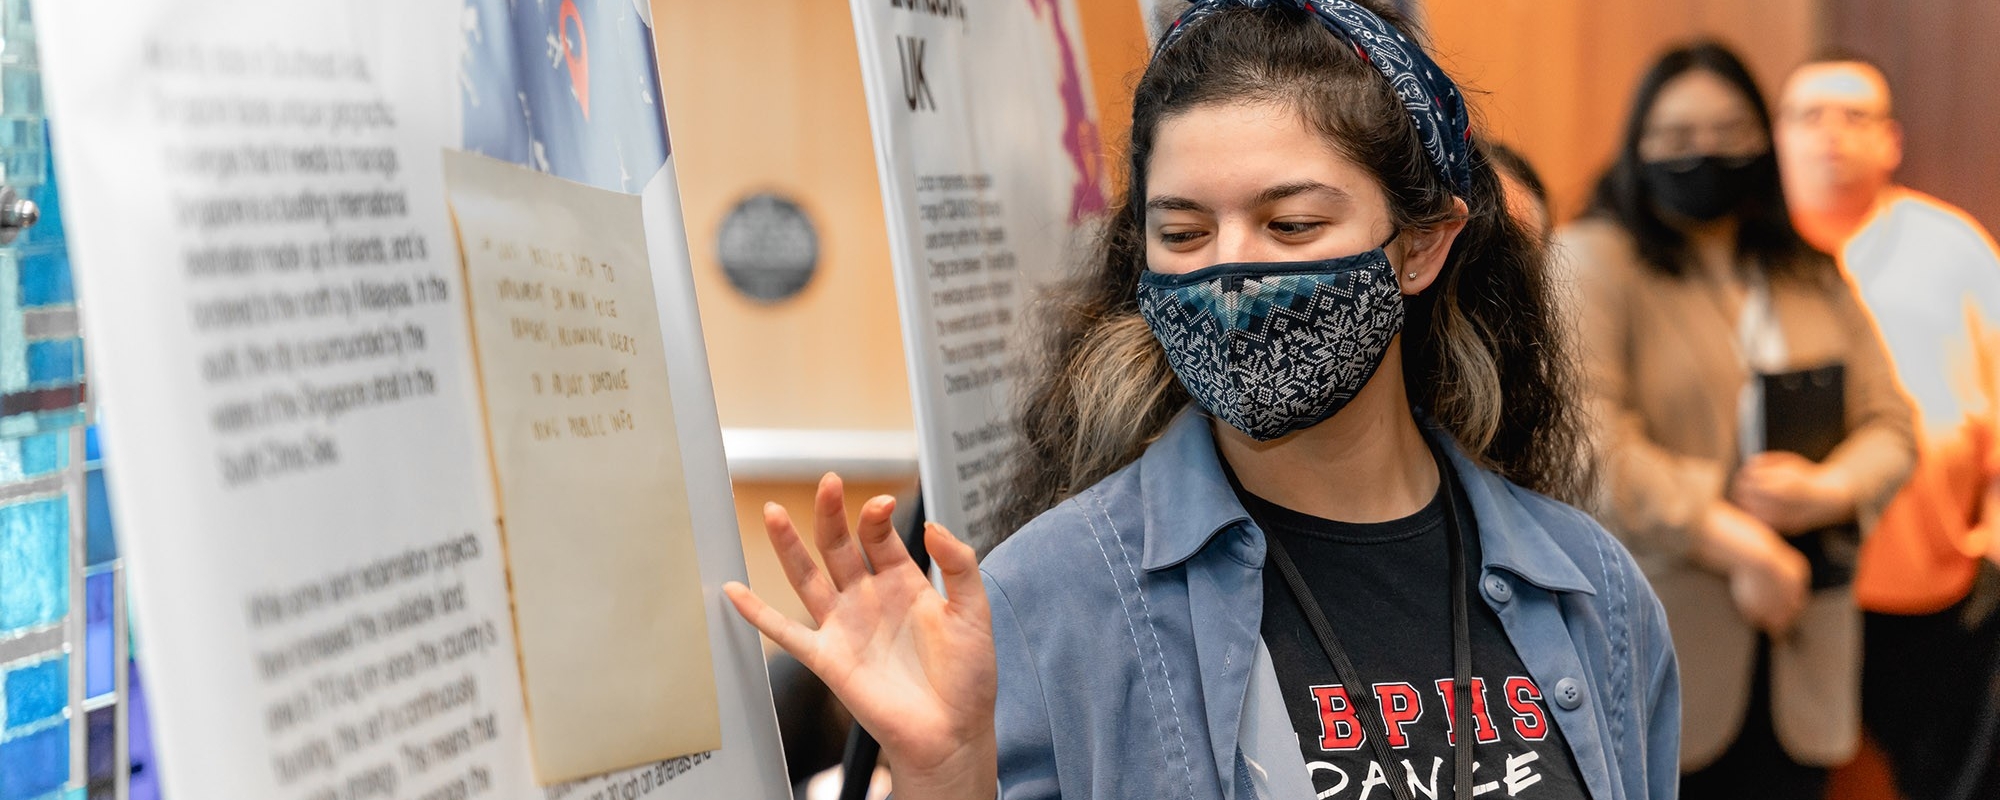 A person wearing a mask motions to their poster board at a conference